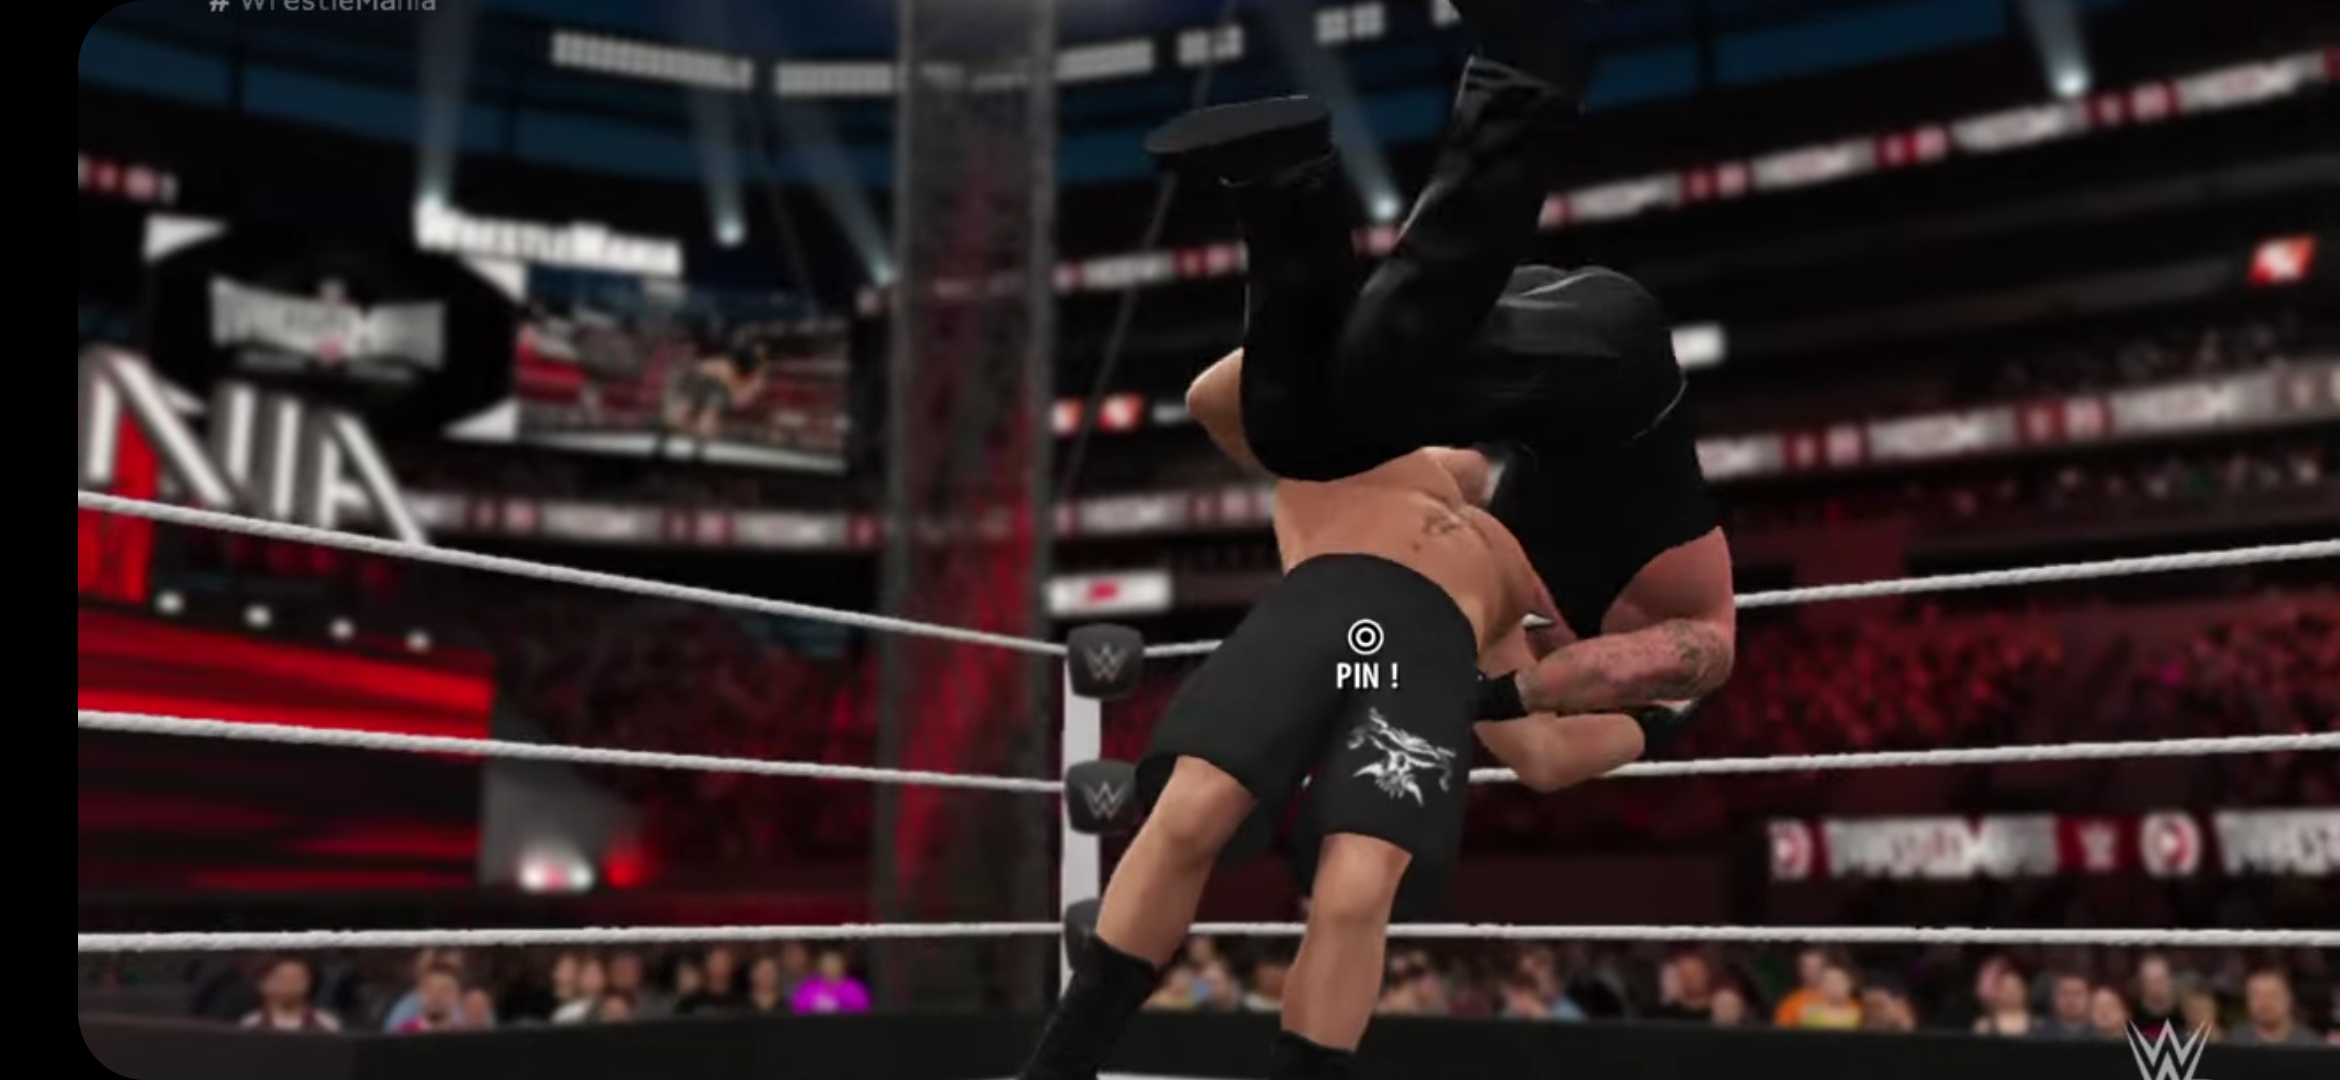 WWE 2K16 Highly Compressed PC